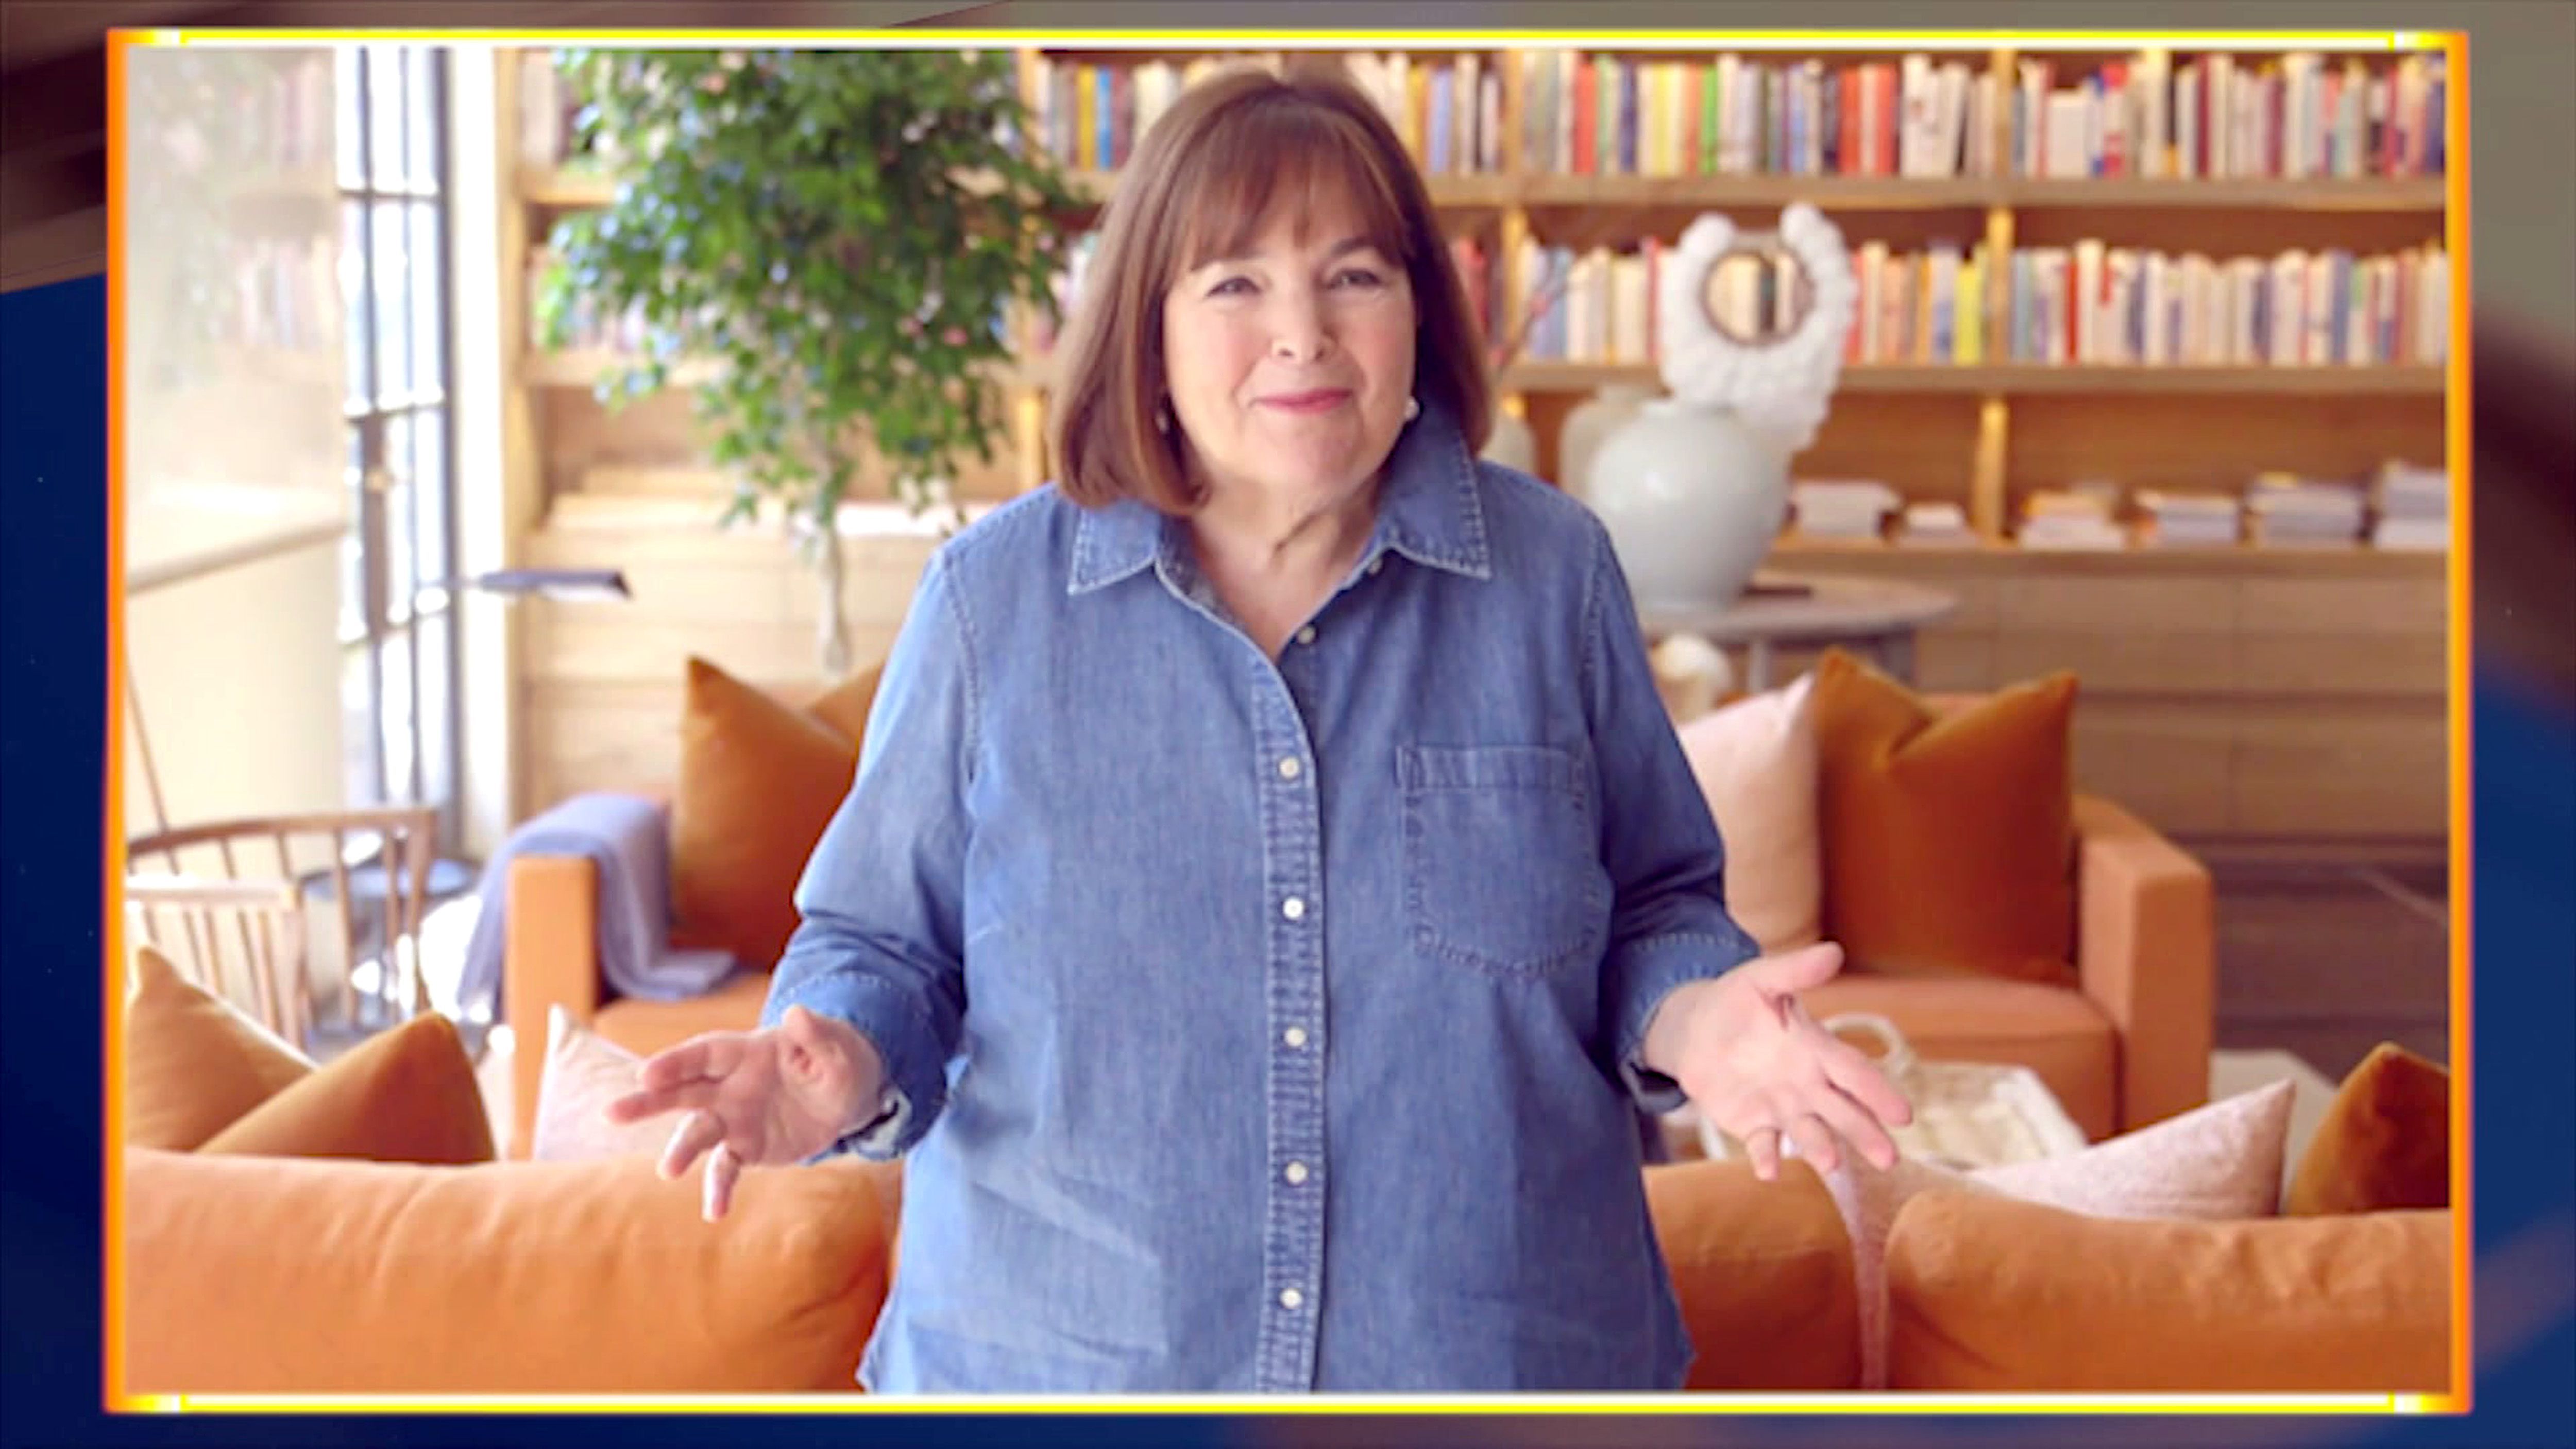 Ina Garten stands in front of an orange couch while wearing a blue short and holding her hands out. 